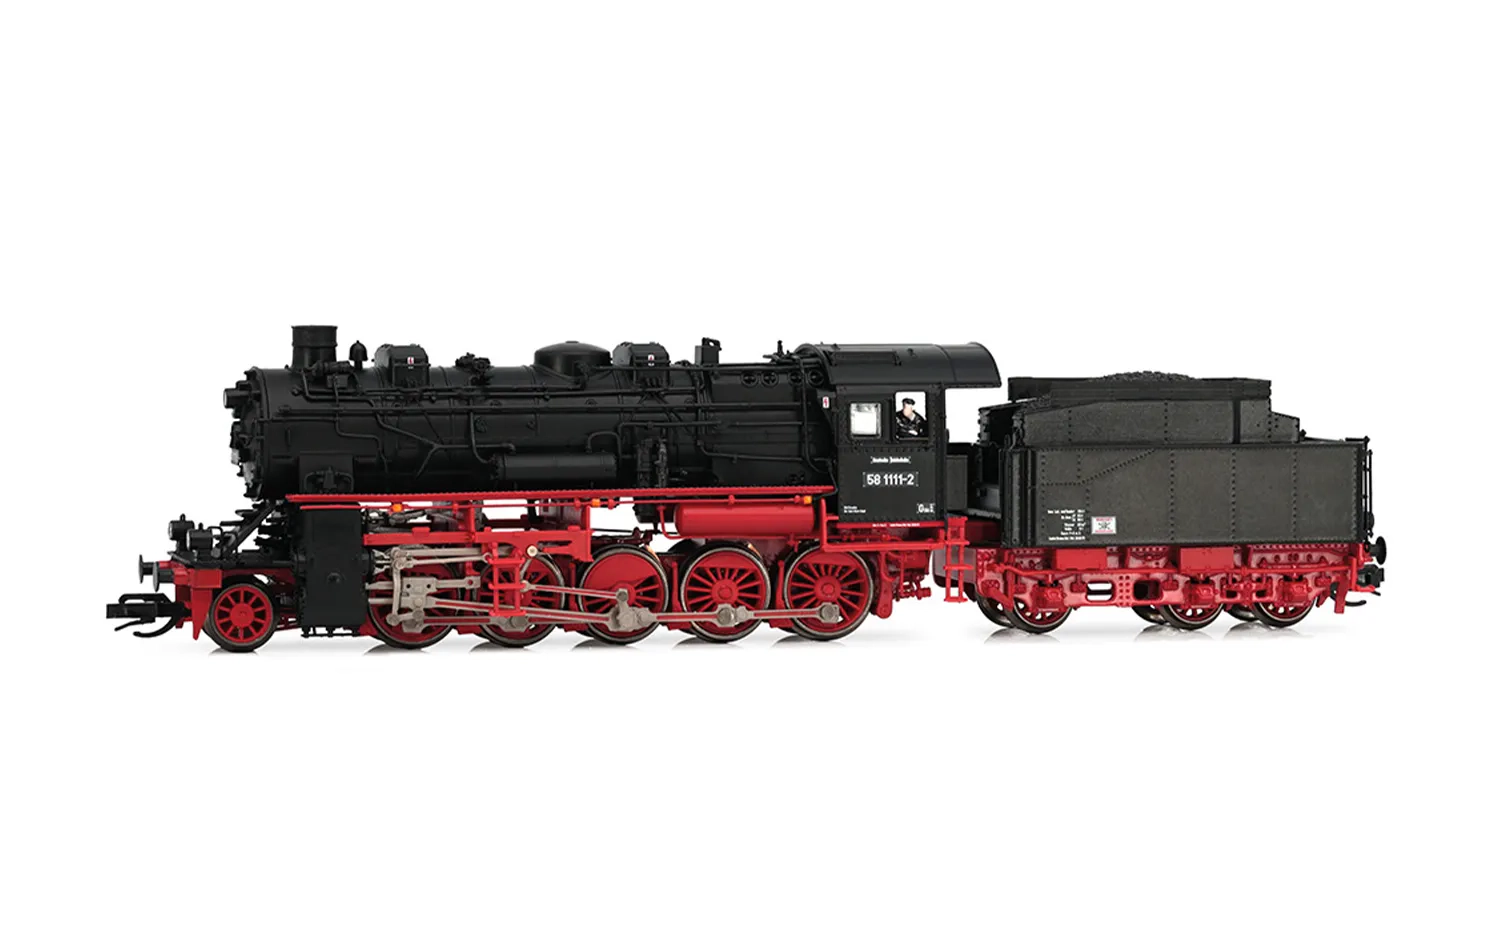 DR, steam locomotive with tender, 58 1111-2, 3-dome boiler, 3 headlights, ep. IV